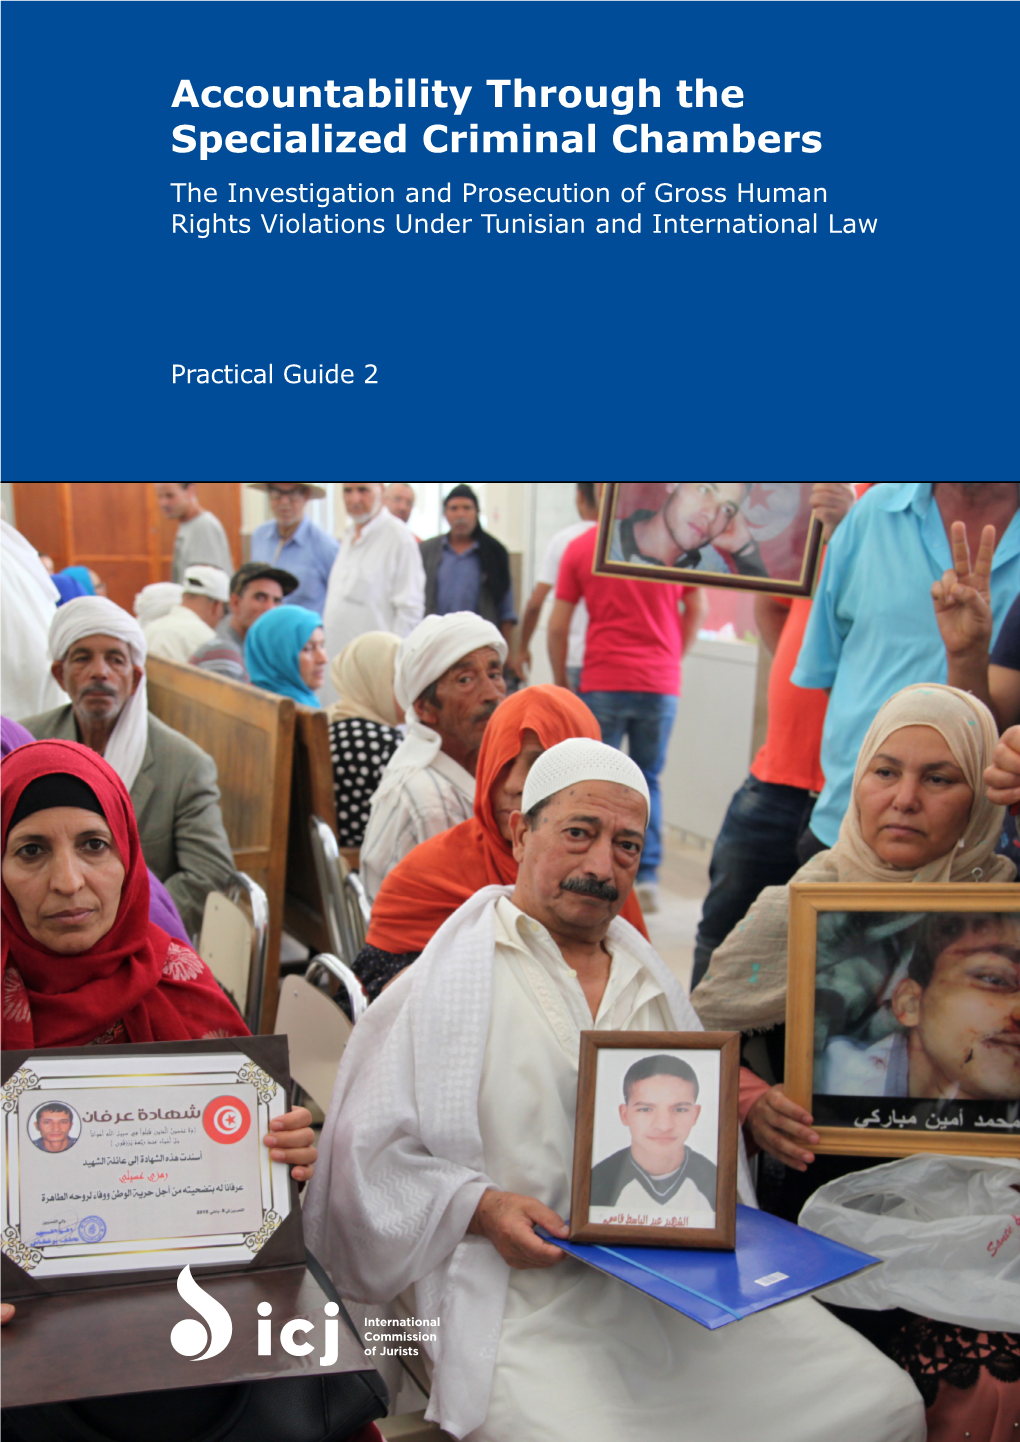 Accountability Through the Specialized Criminal Chambers the Investigation and Prosecution of Gross Human Rights Violations Under Tunisian and International Law